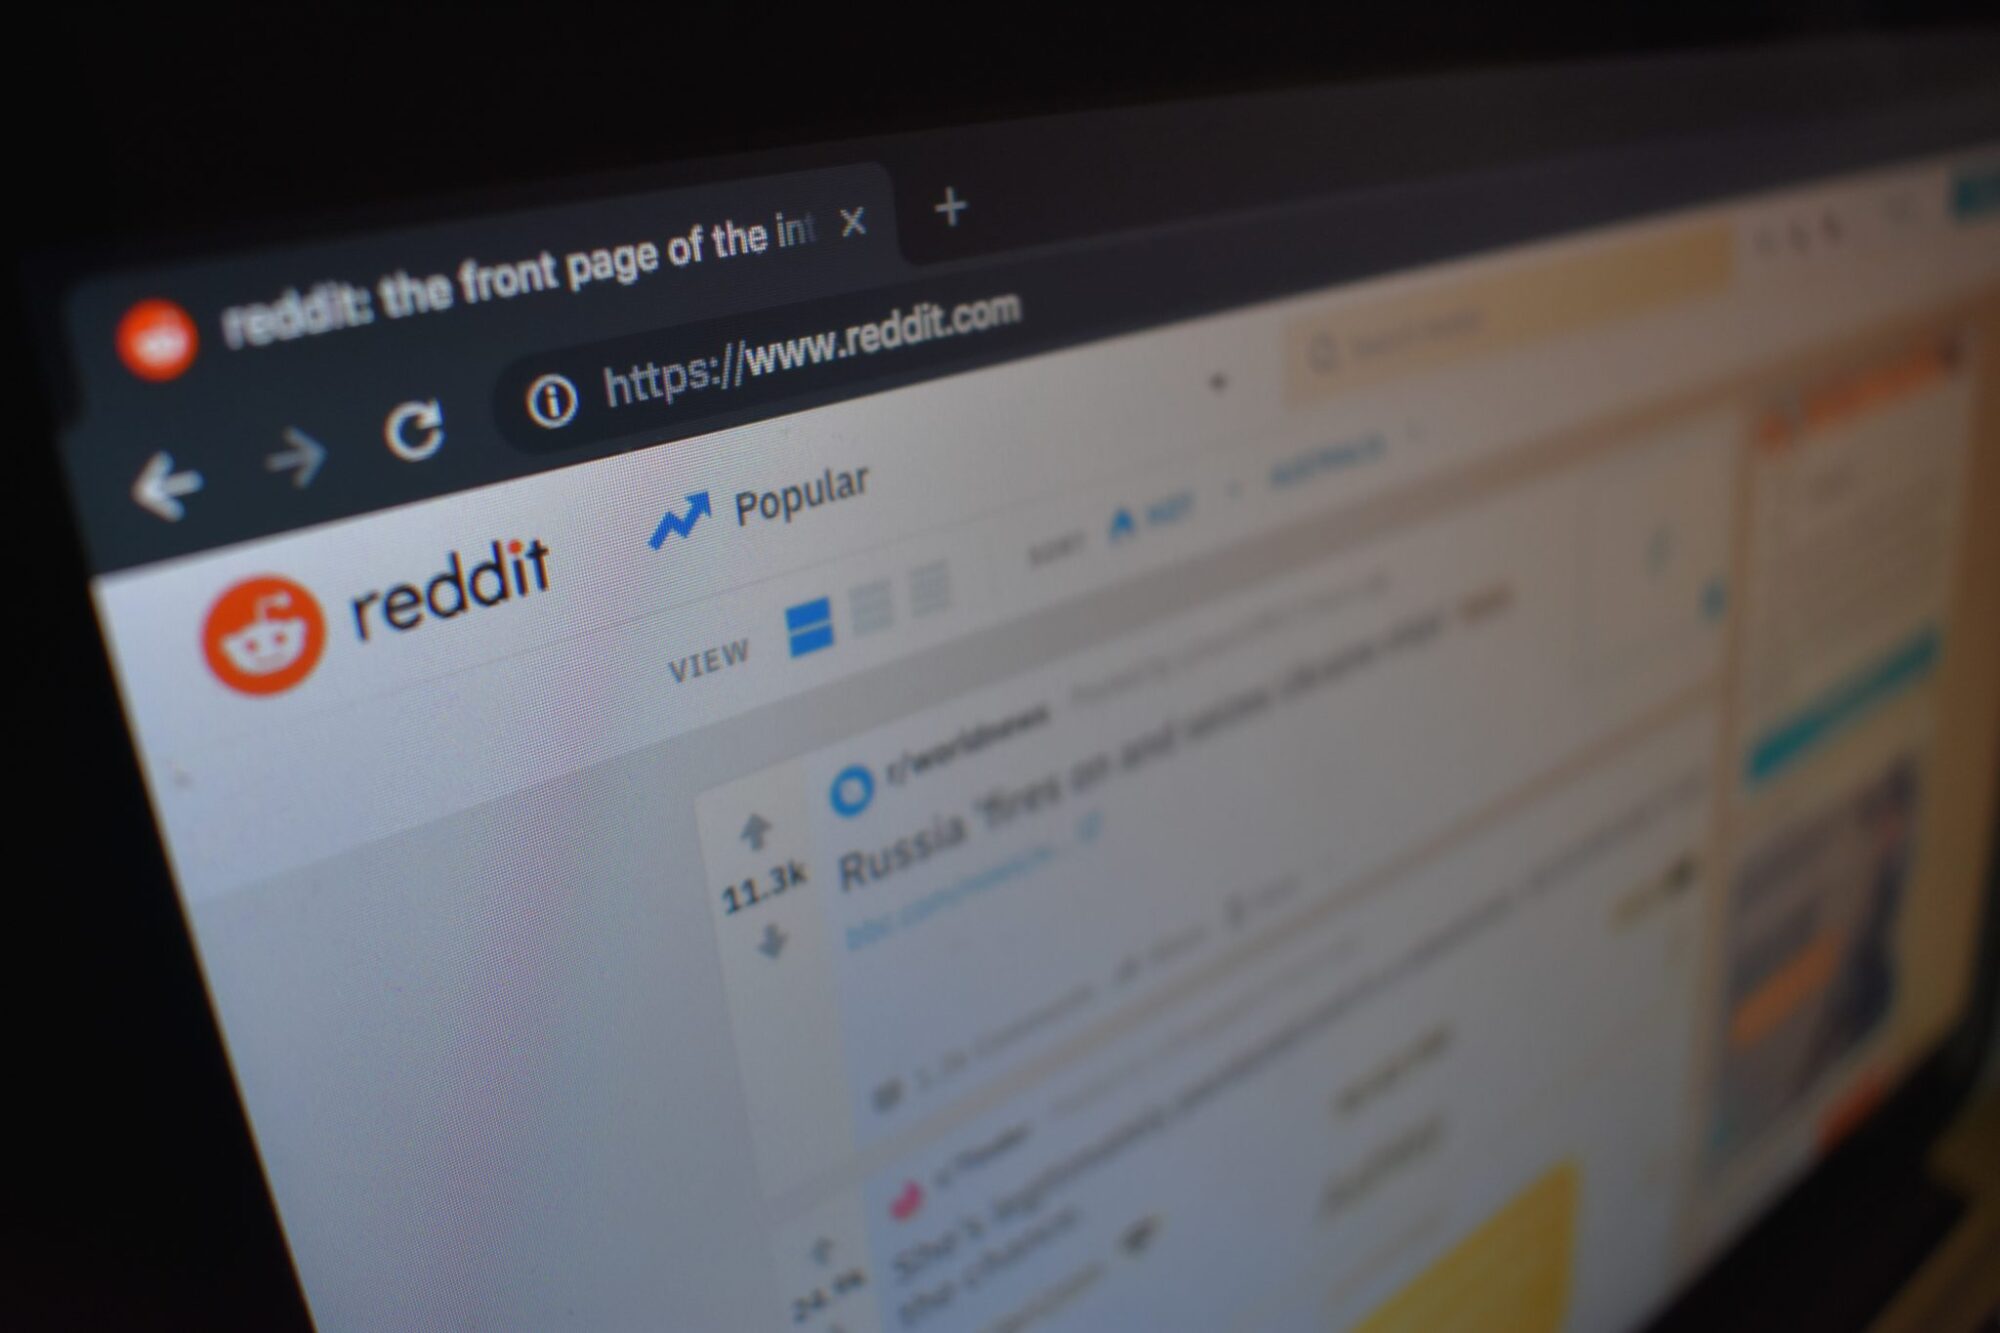 Using reddit to help increase traffic to a blog